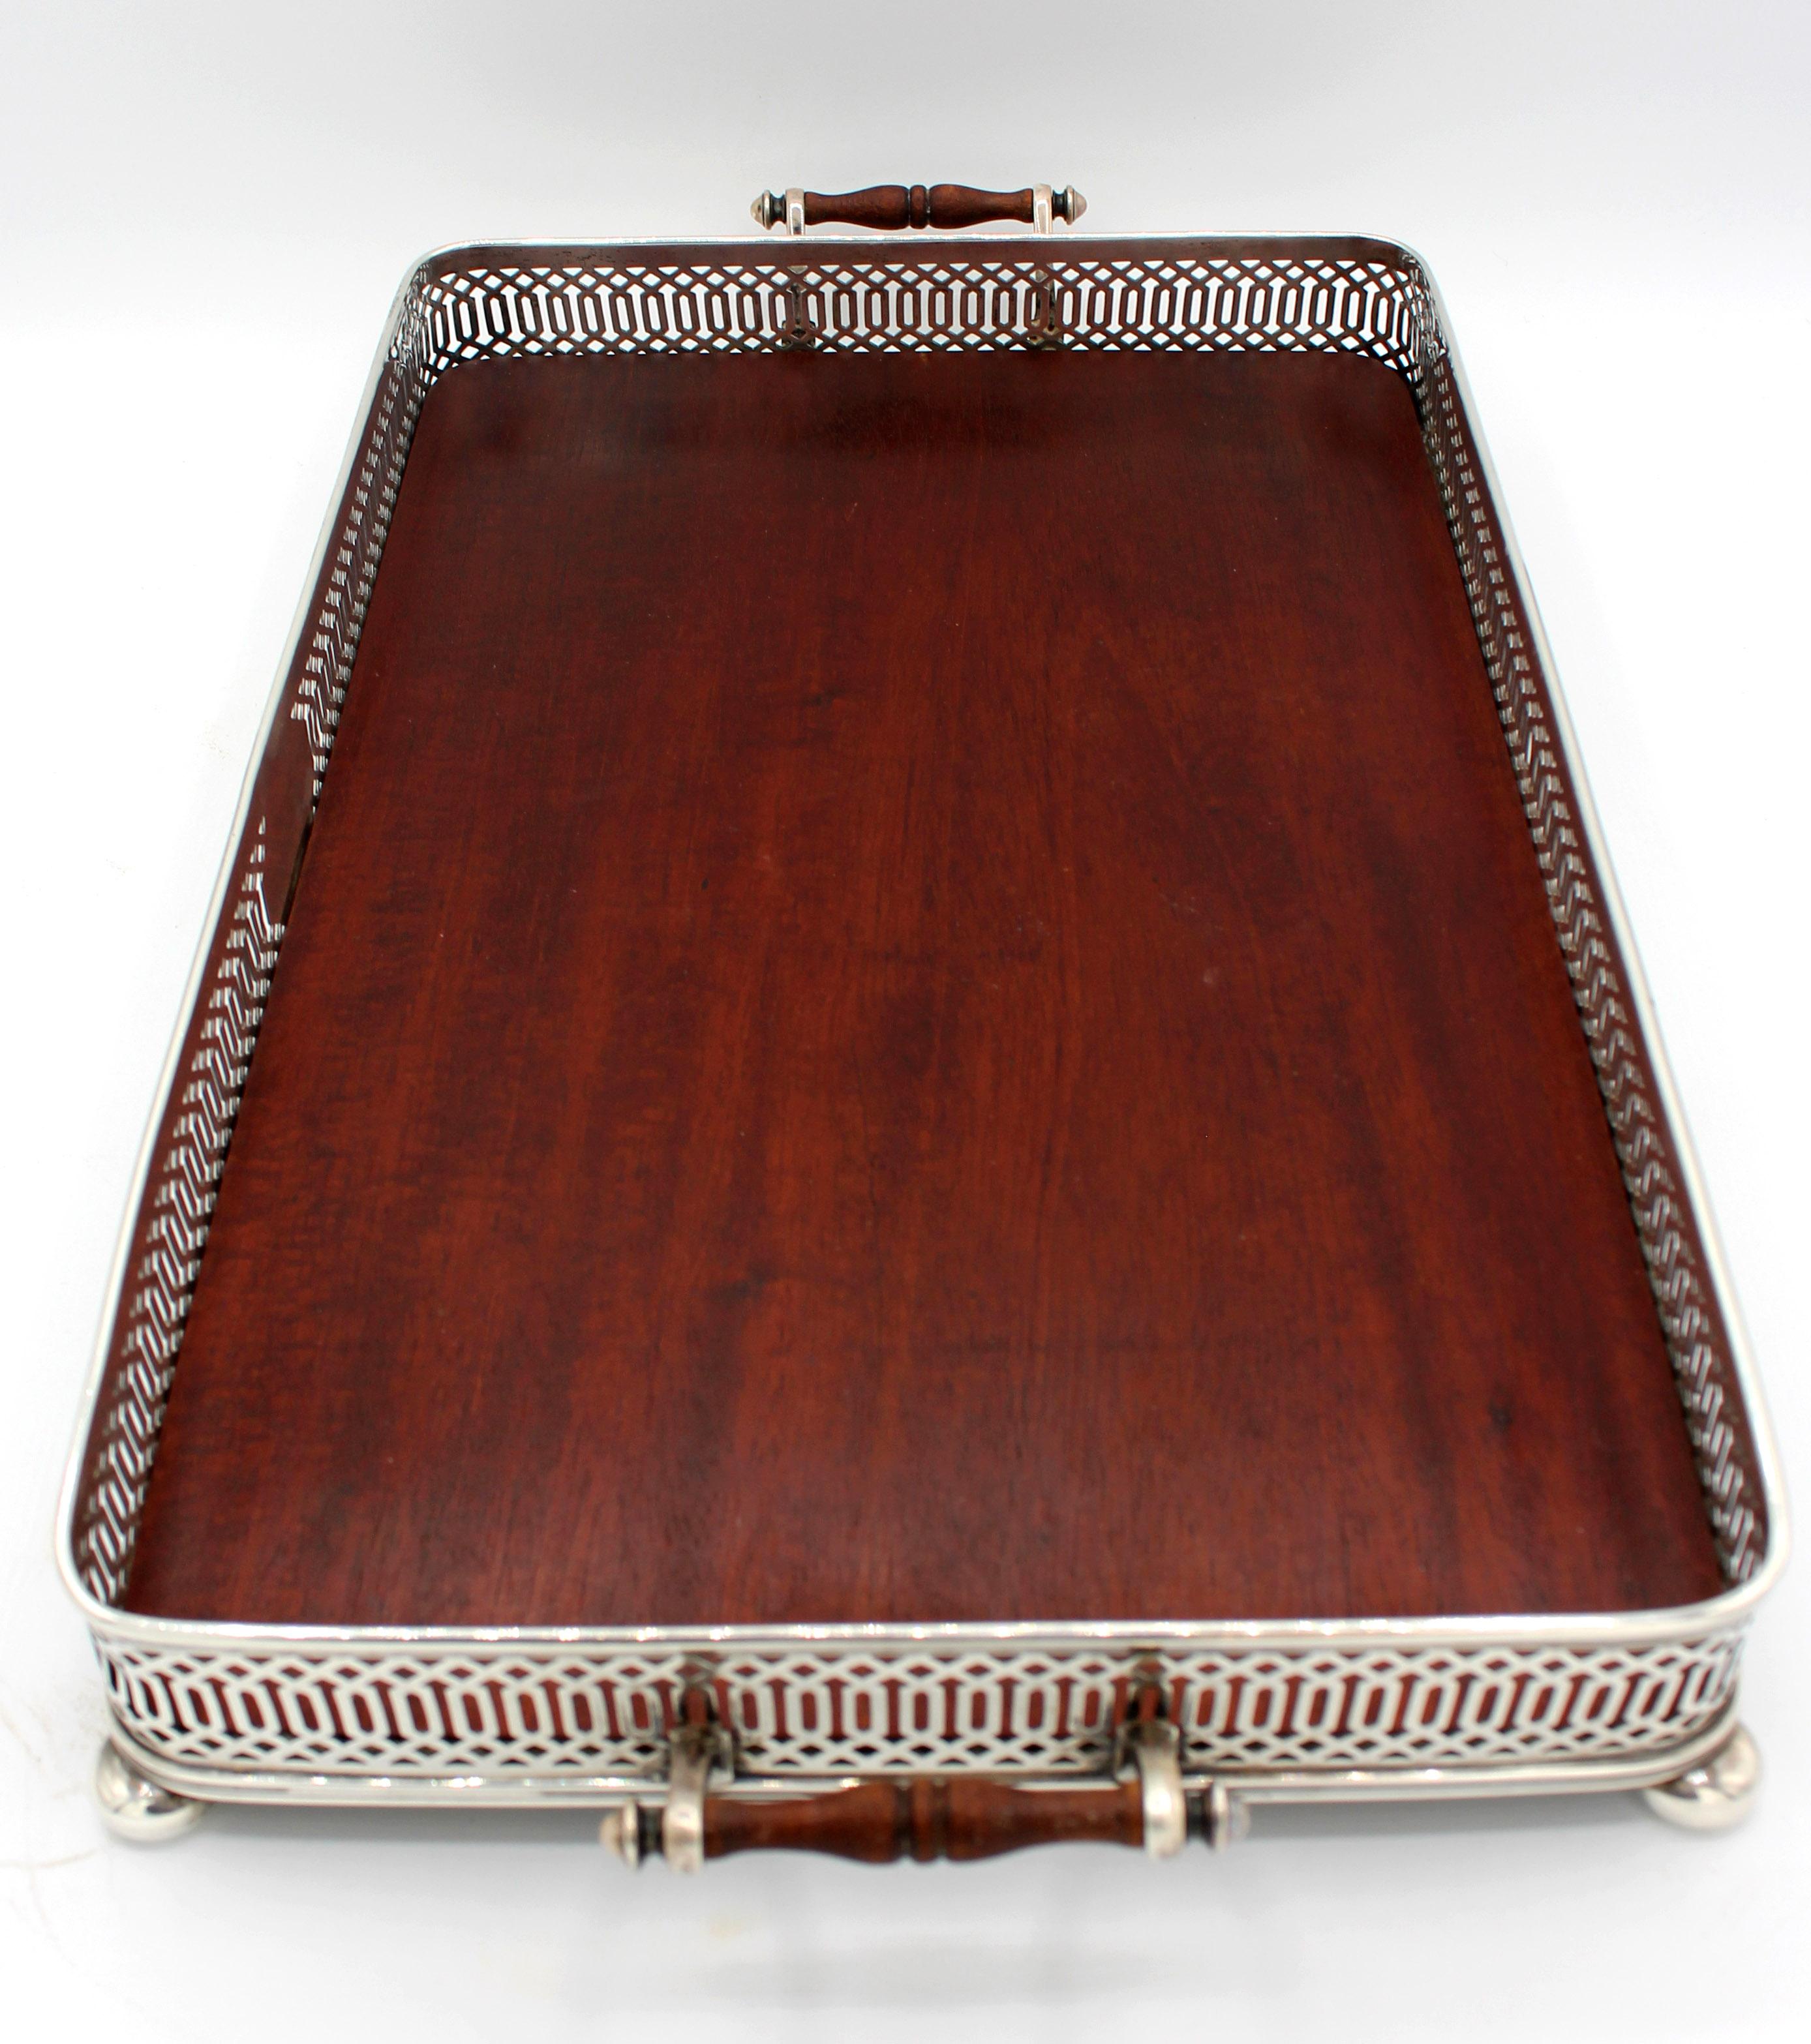 Reed & Barton sterling silver gallery tray raised on sterling button feet with wooden inset surface. Sterling & turned wood handles. Never engraved.
17.75